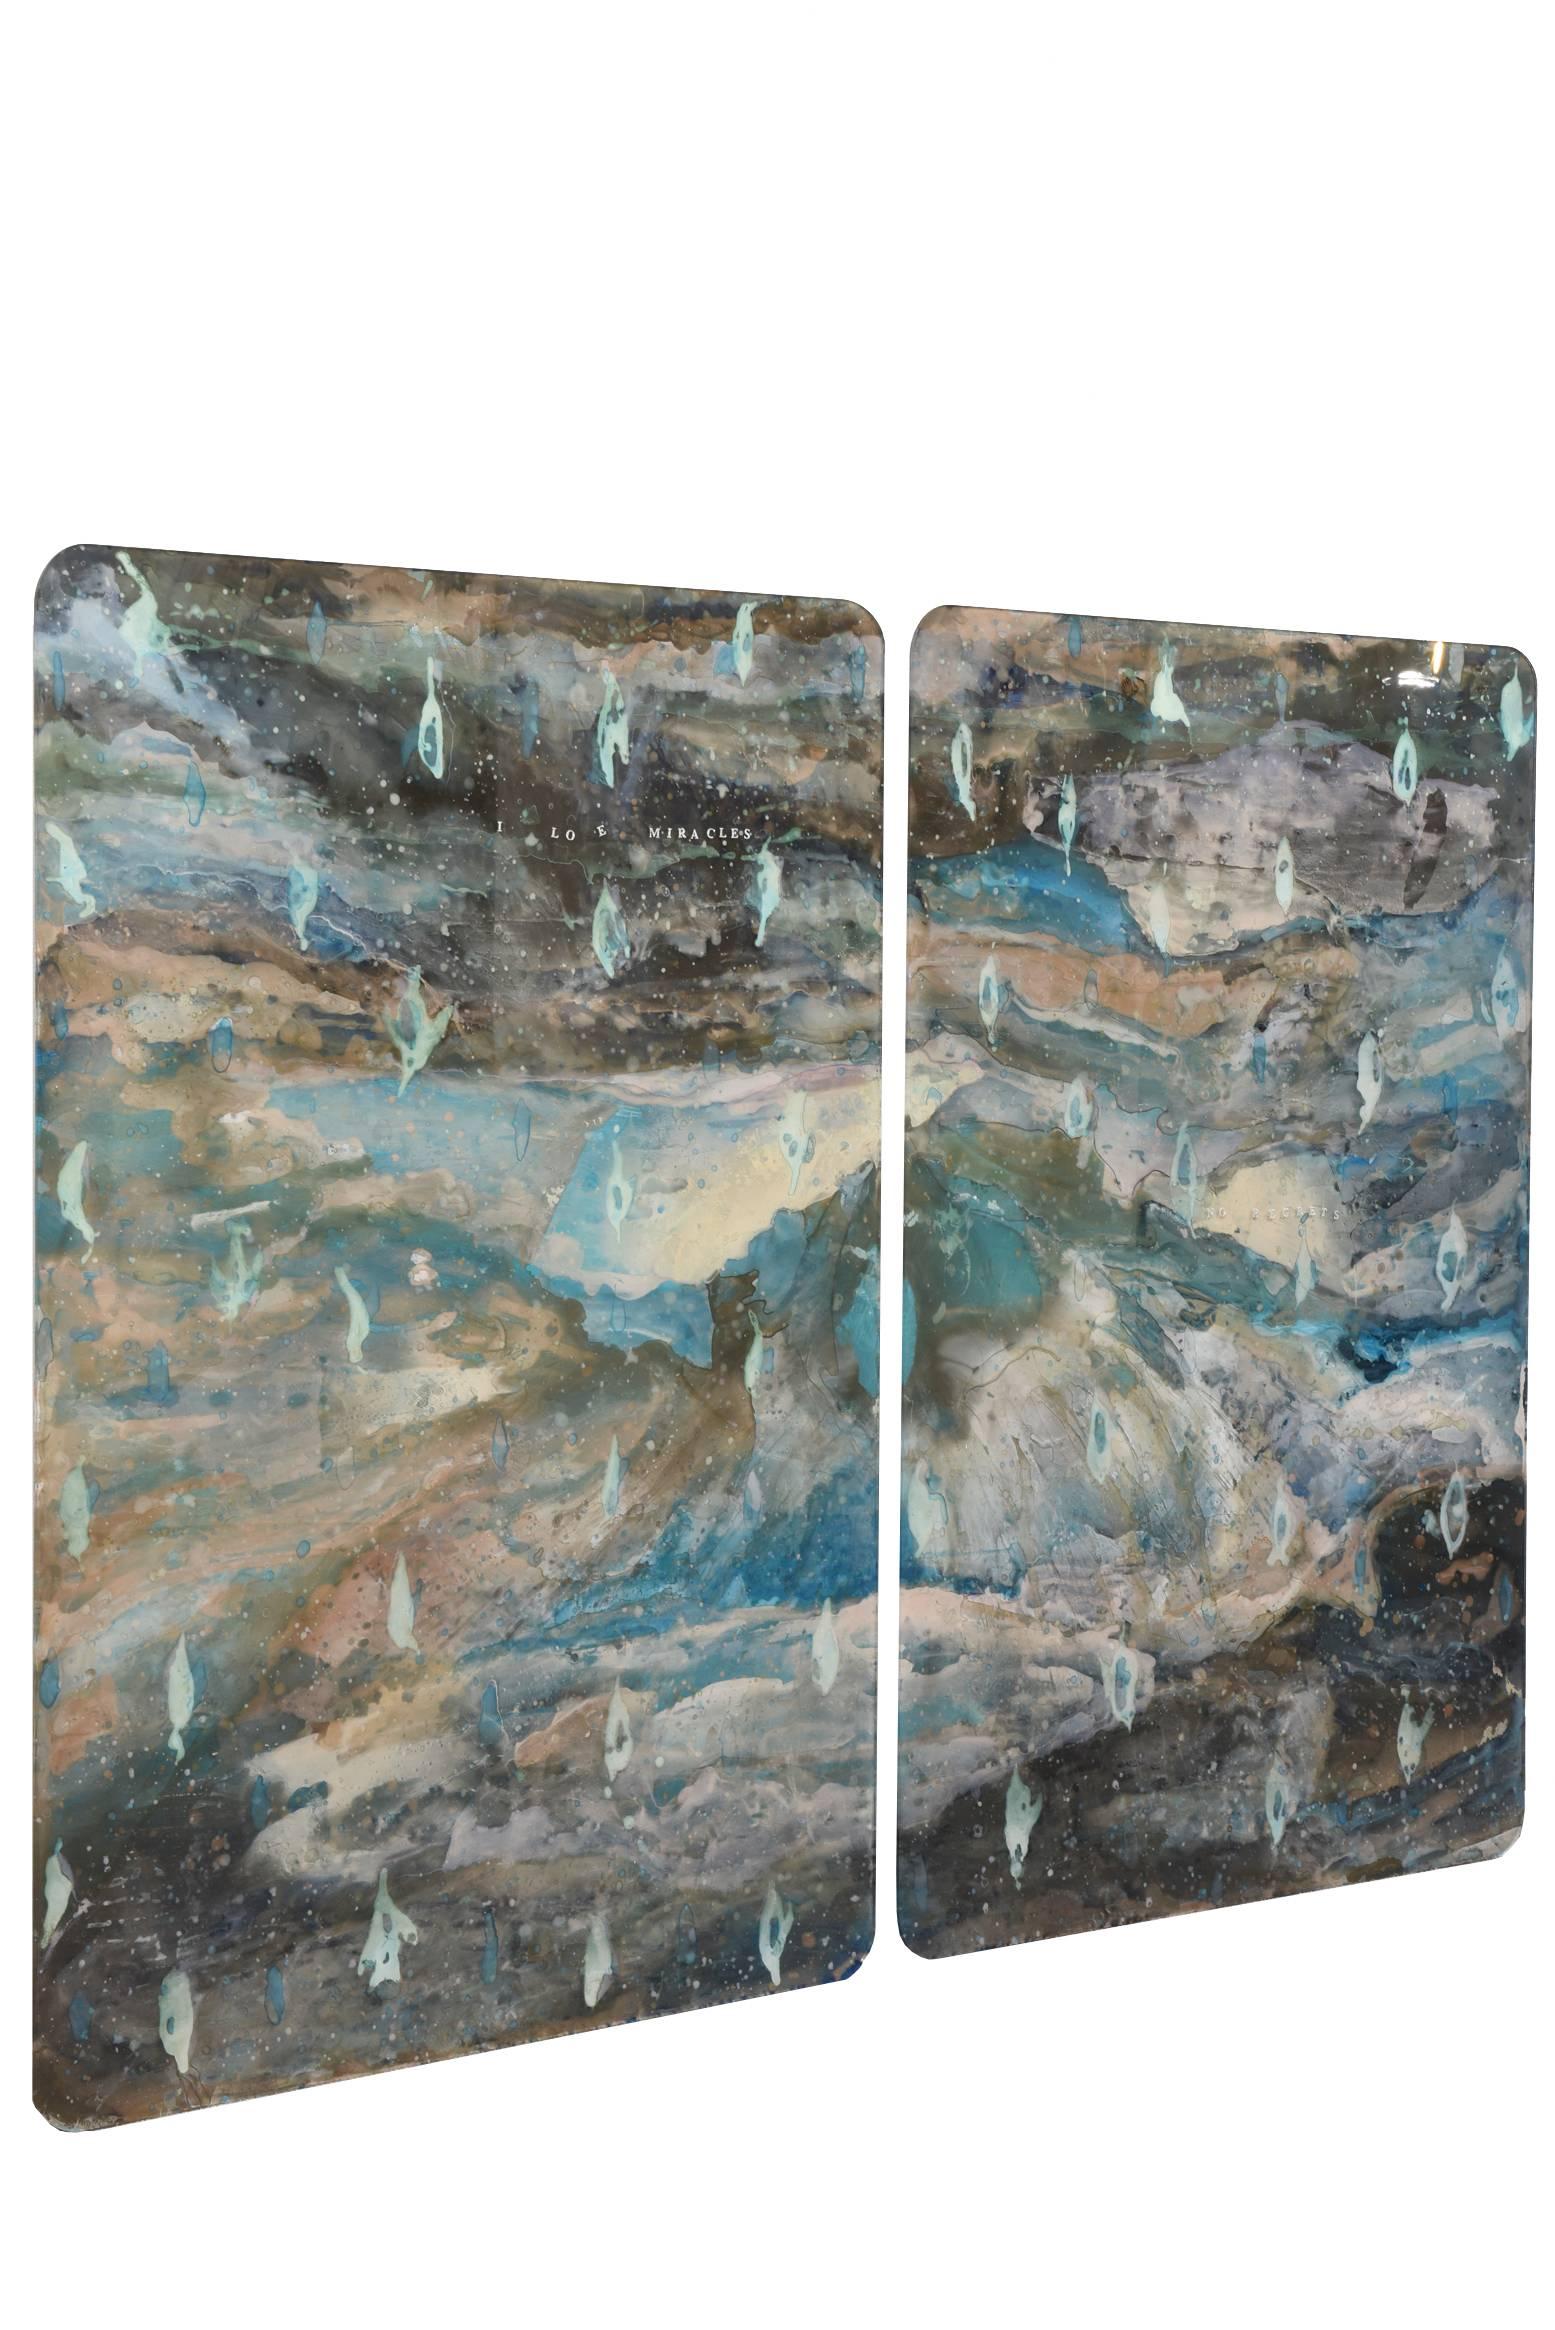 This stunning and amazing mixed-media work of art by artist and painter Robert Bery changes in forms and landscape as you look at it from different angles and ways. The colors are spectacular and also change. The mixed media consist of layered